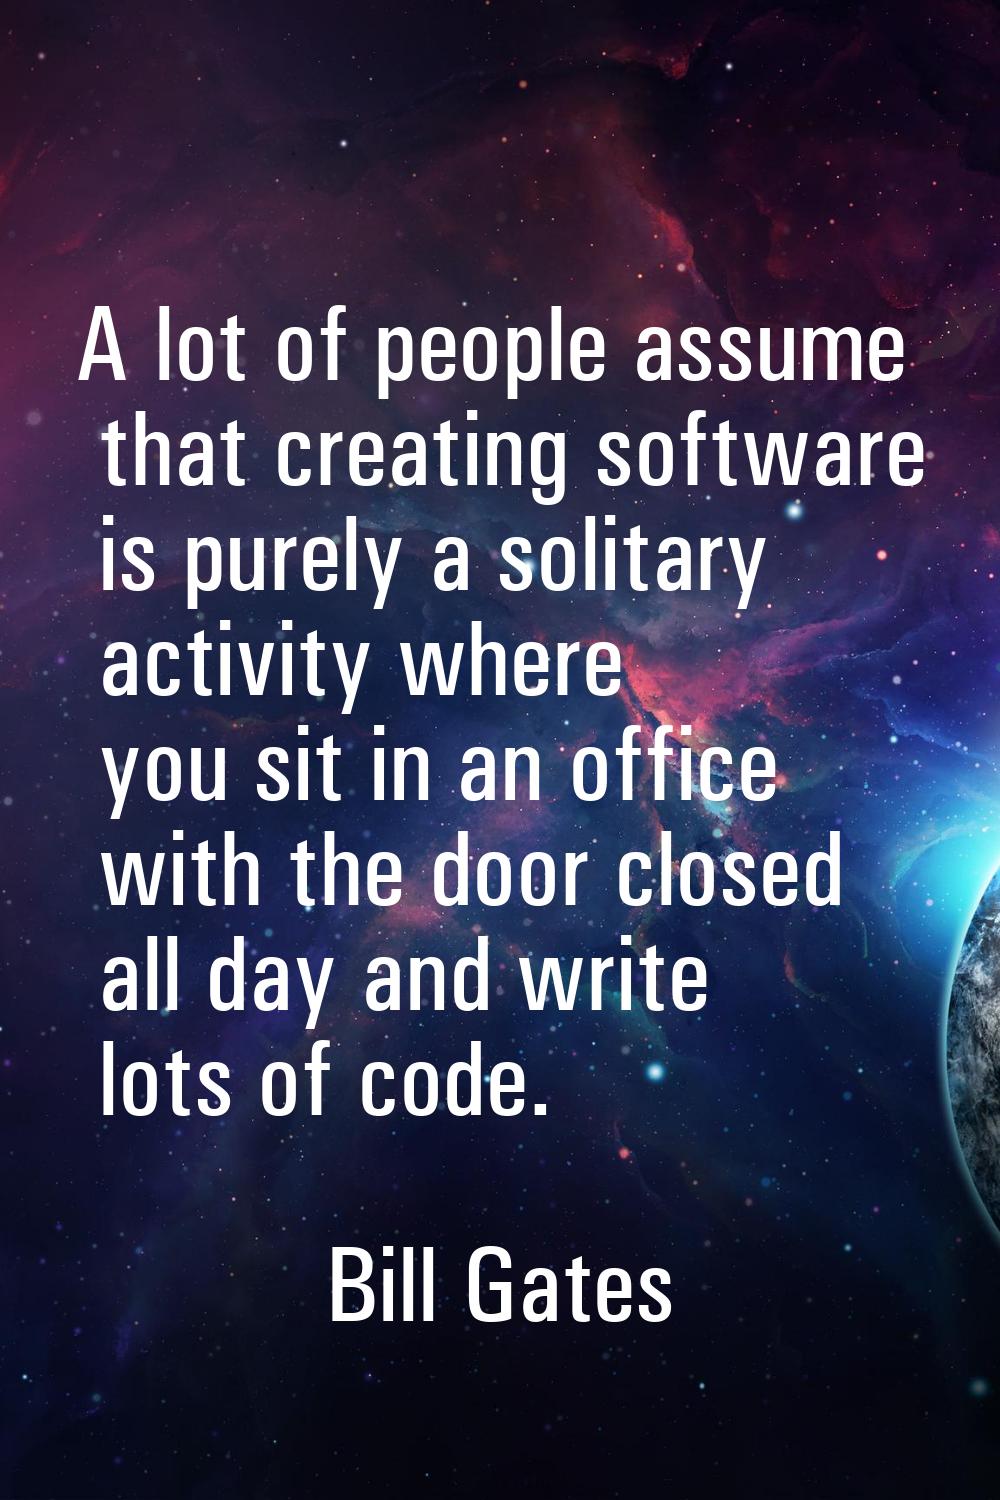 A lot of people assume that creating software is purely a solitary activity where you sit in an off